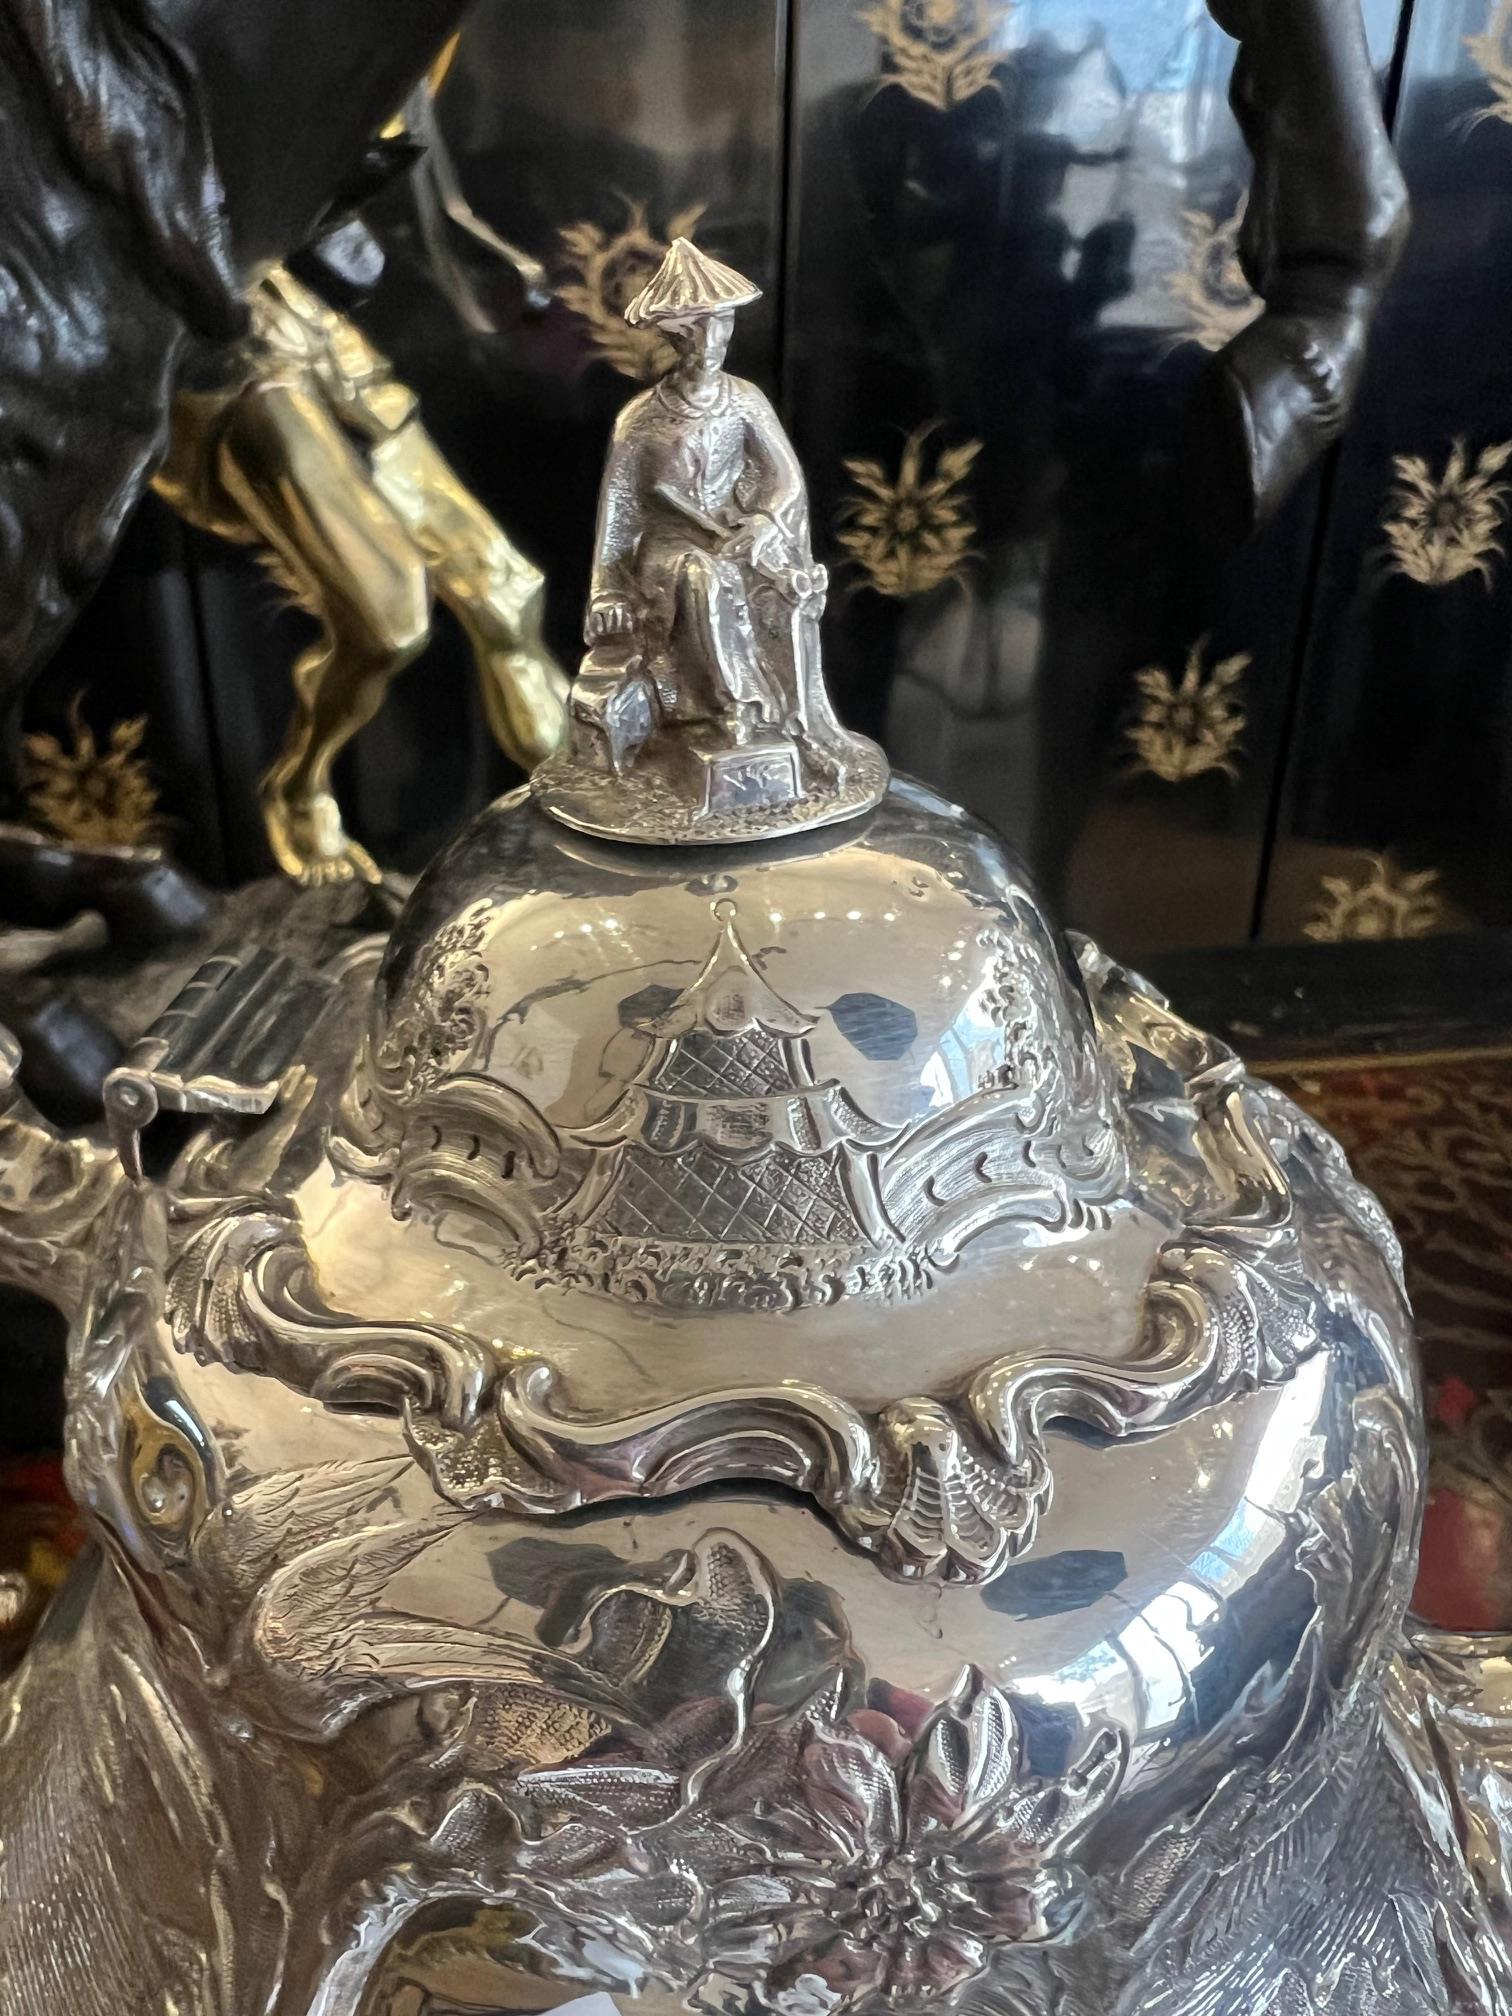 A RARE 19TH CENTURY SILVER TEA AND COFFEE SET WITH SCENES OF TEA AND COFFEE PRODUCTION - Image 16 of 17